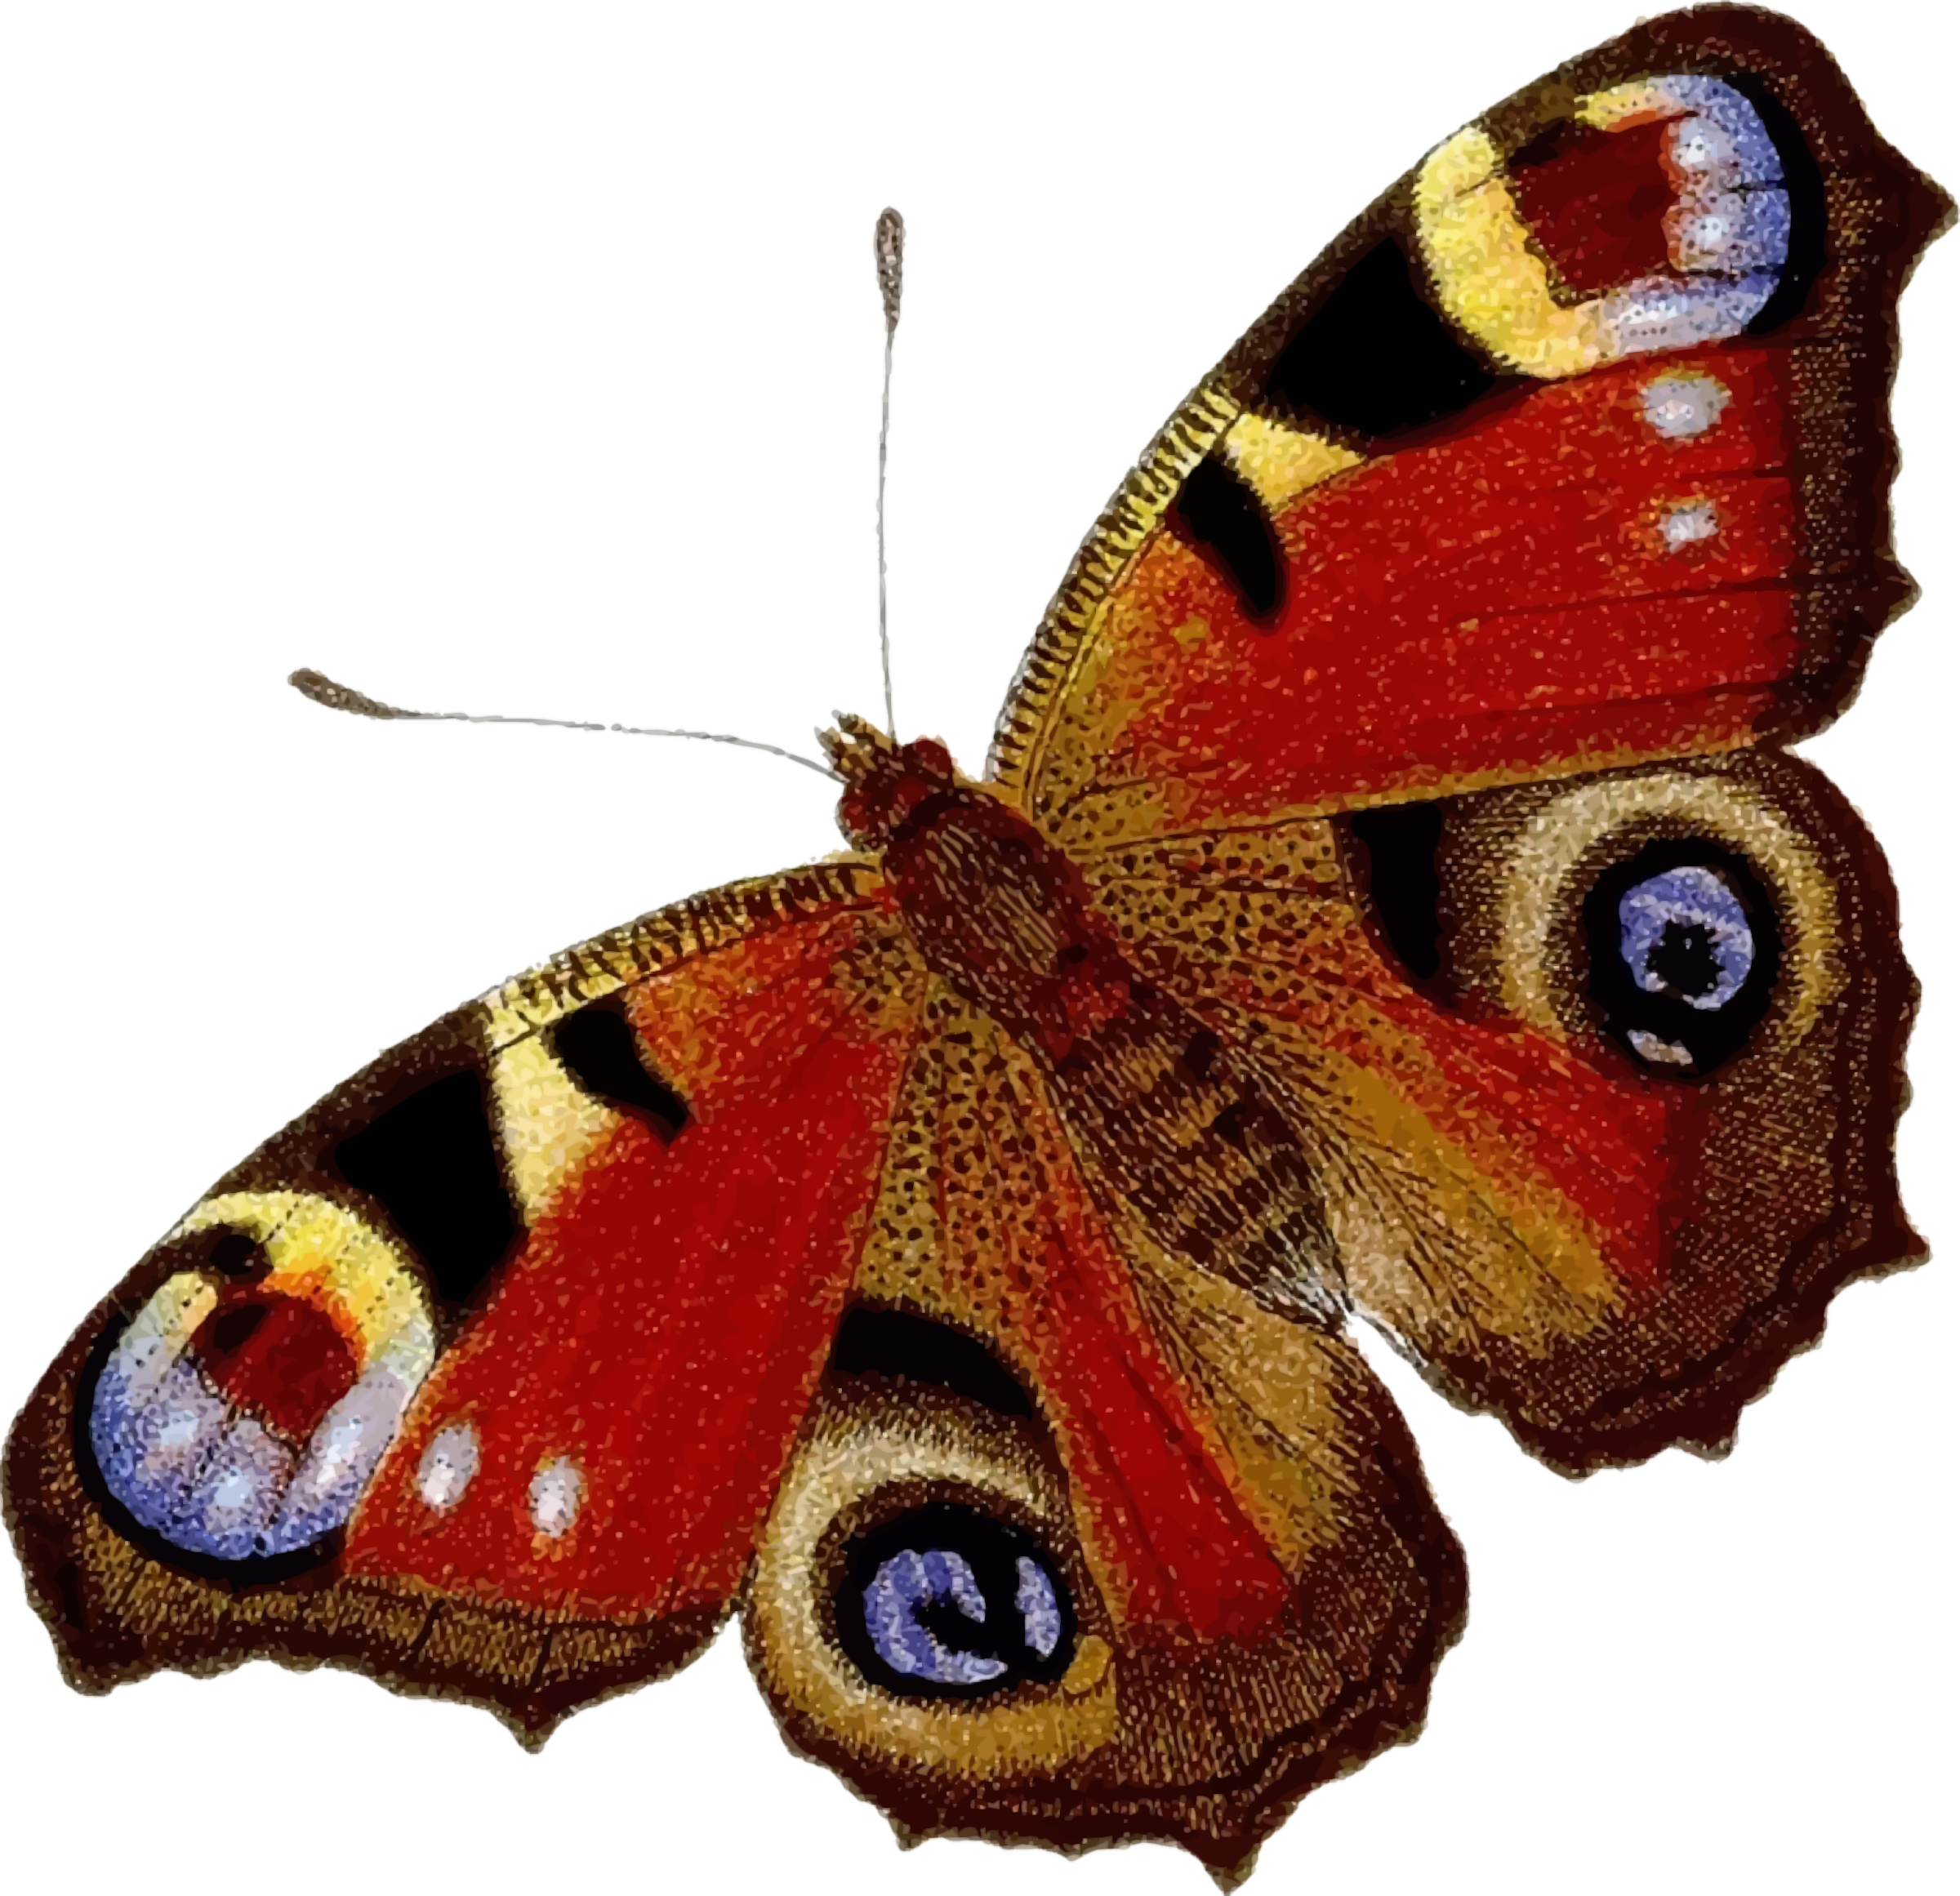 Peacock Butterfly - Peacock Butterfly (2400x2322)